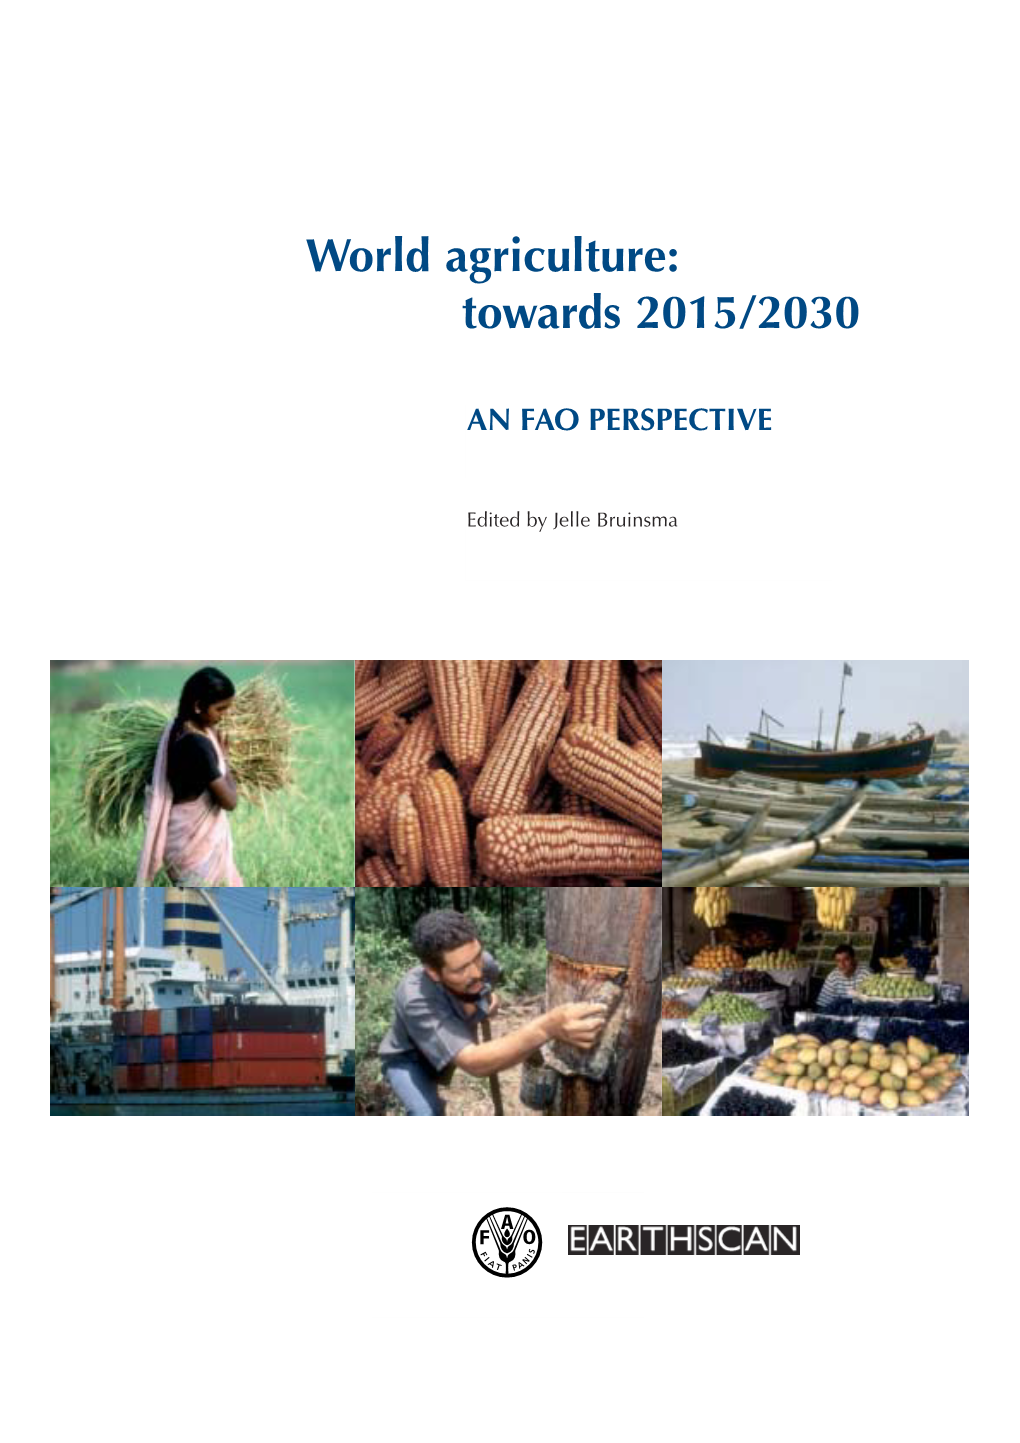 World Agriculture: Towards 2015/2030